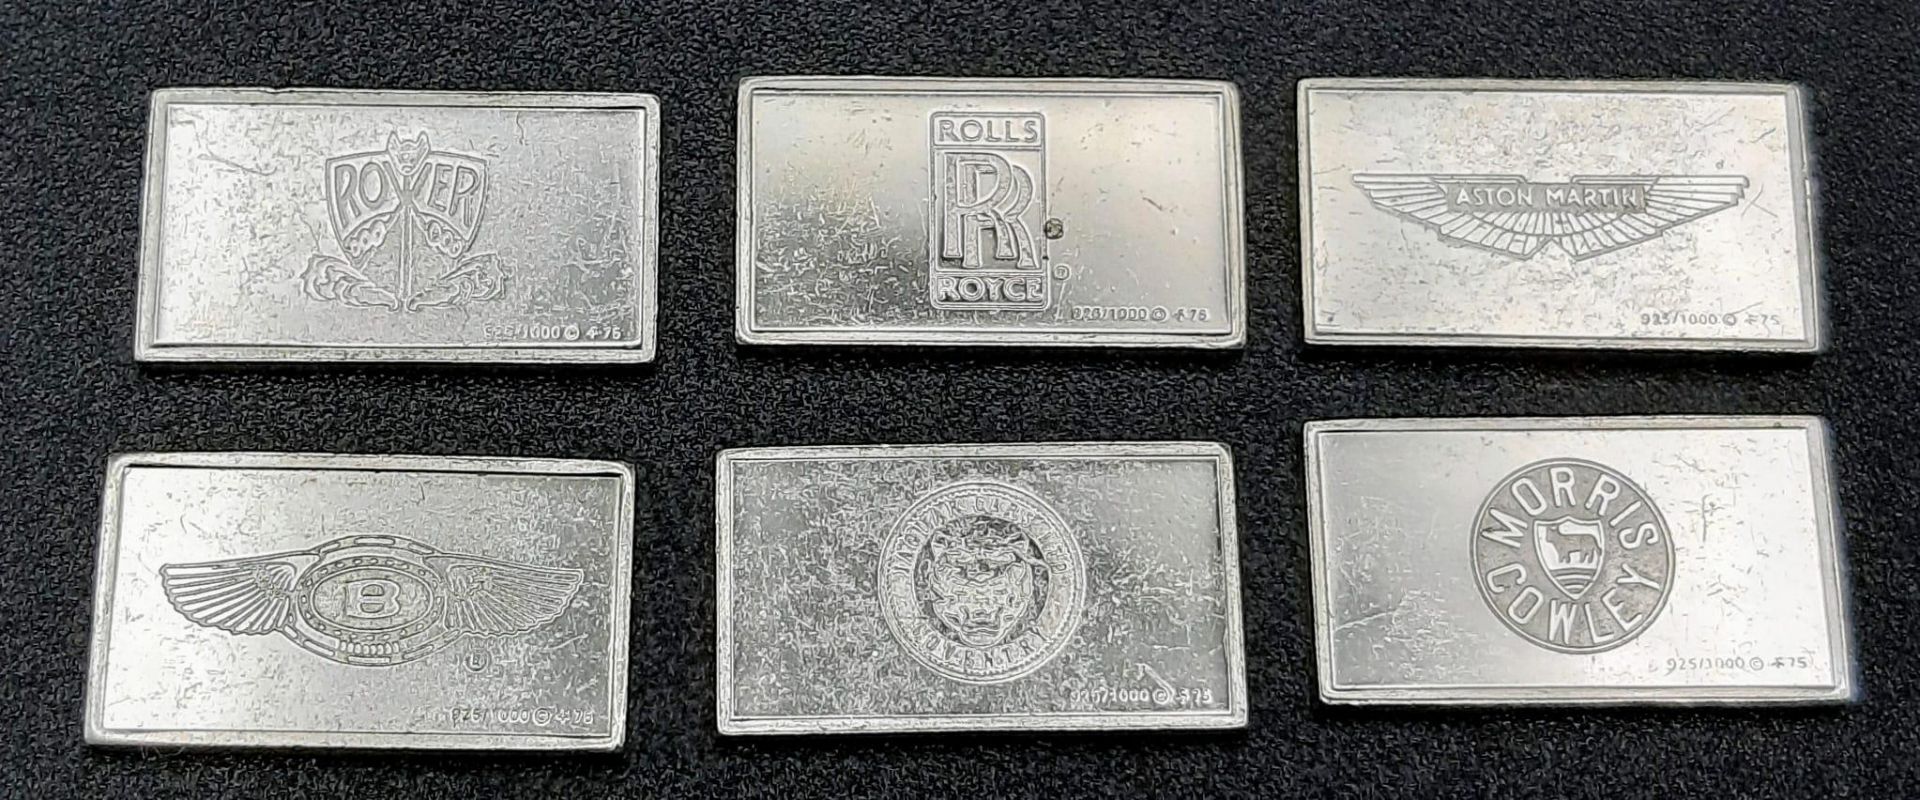 A SELECTION OF 6 BEST BRITISH CAR MANUFACTURERS MINI PLAQUES WITH LOGO AND CARS AND DATES. BRANDS TO - Image 3 of 3